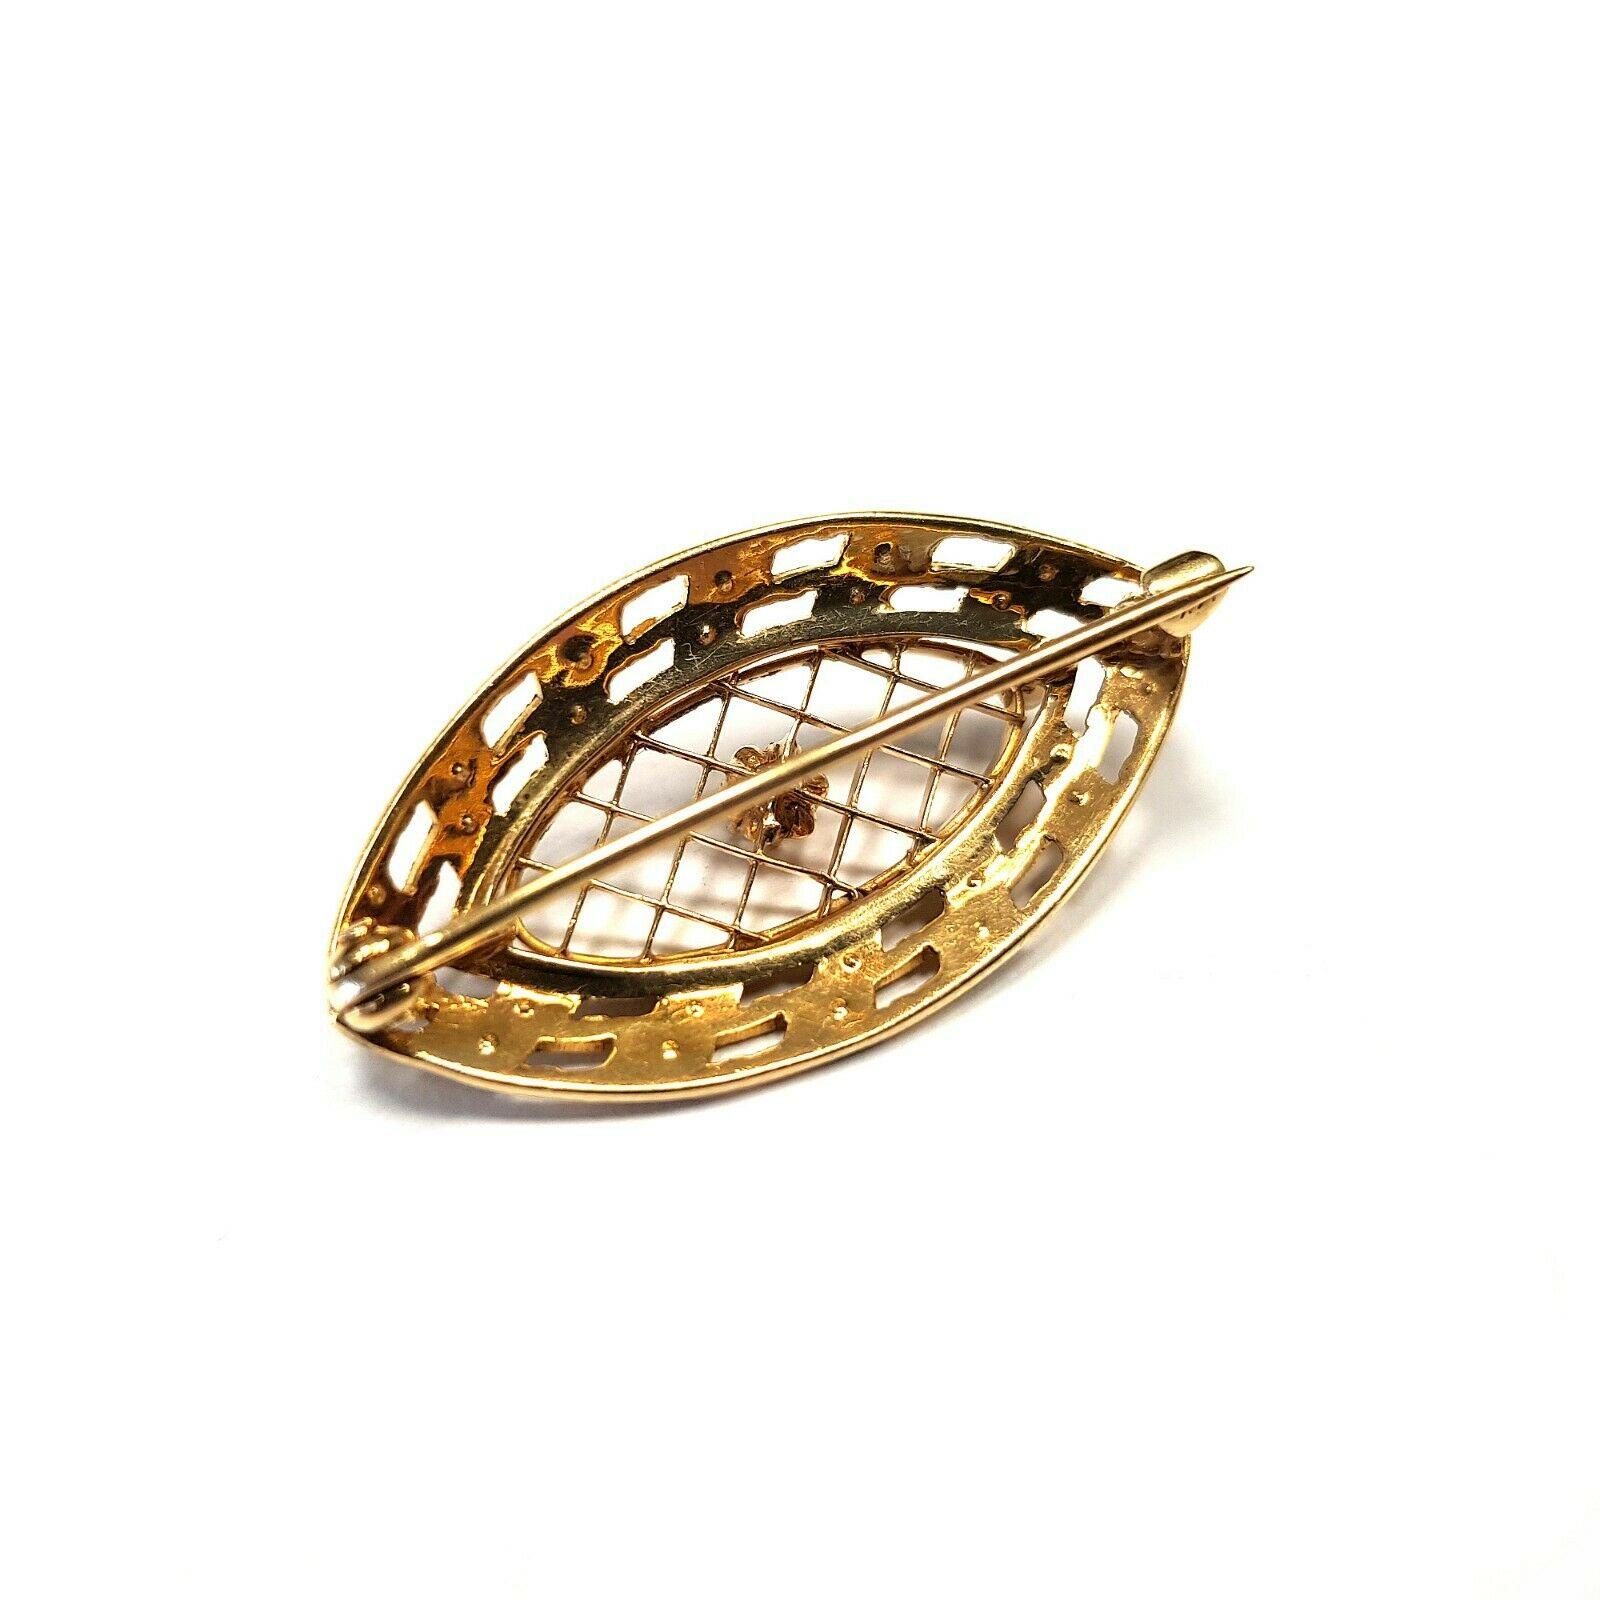 Vintage 14 Karat Gold Shield Brooch with Very Tiny Pearls and Diamond 0.08 Carat In Excellent Condition For Sale In Los Angeles, CA